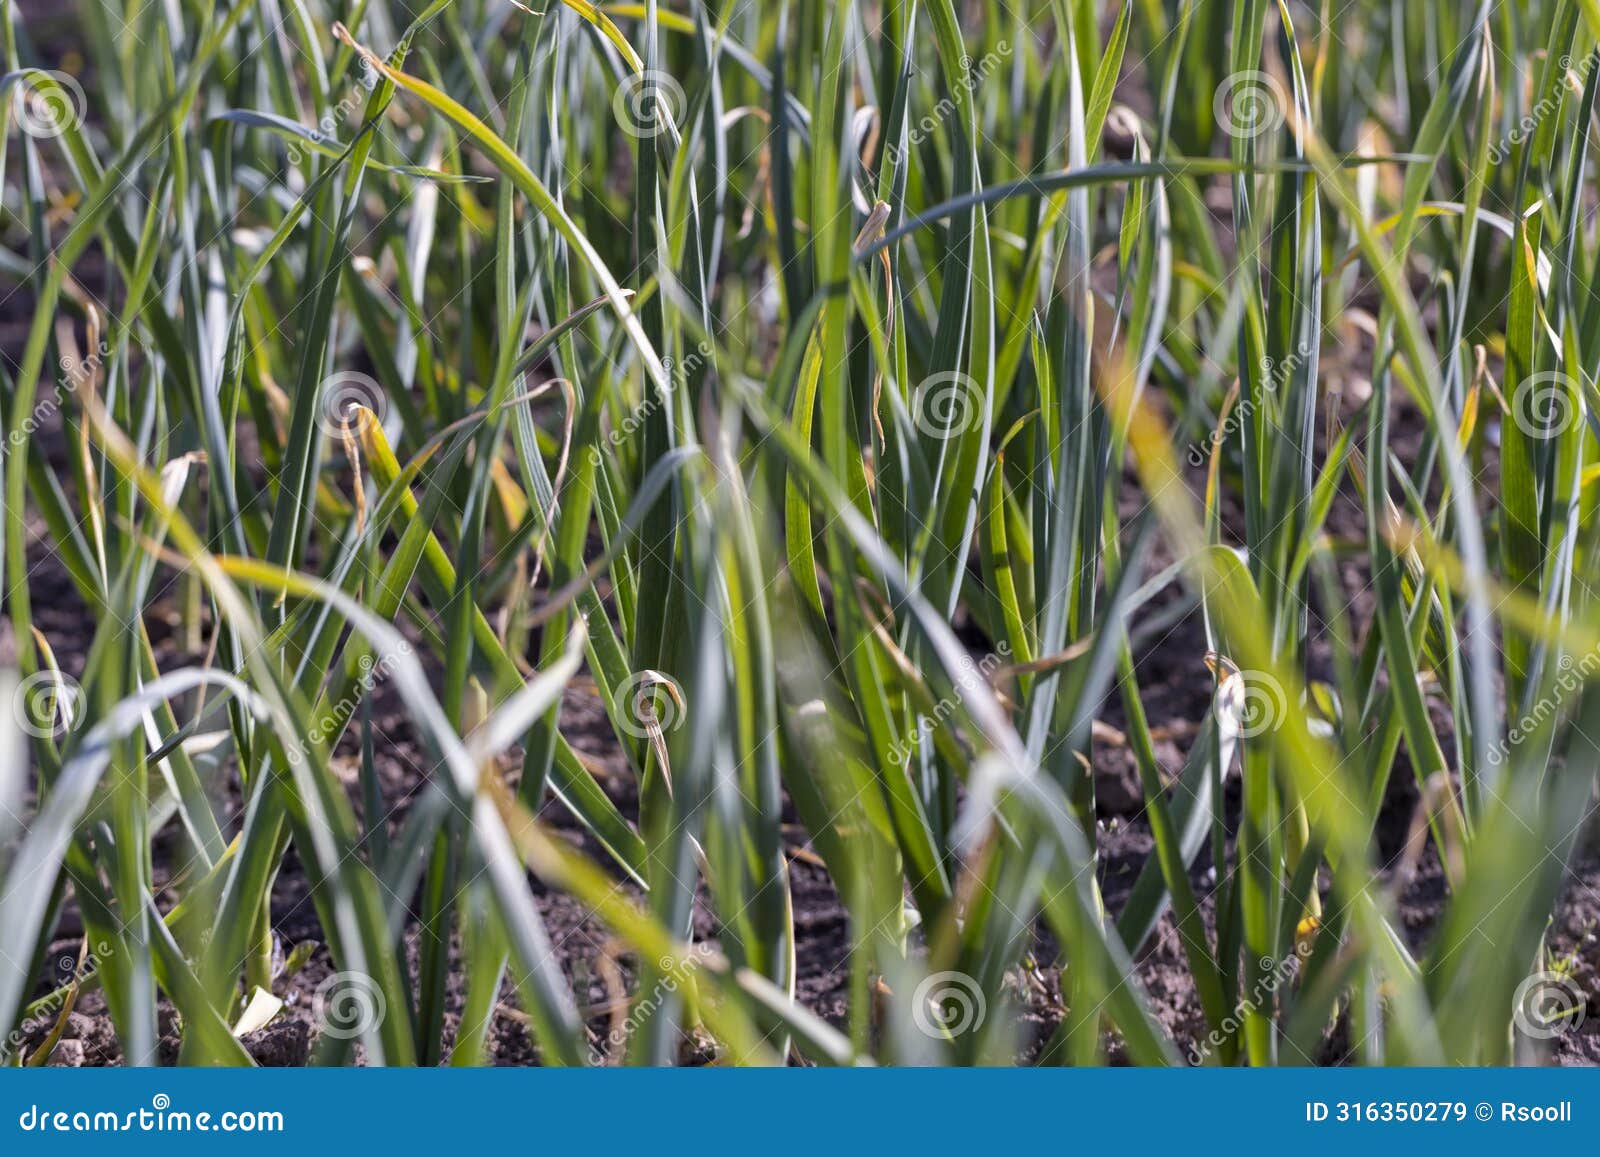 a field completely planted with garlic in summer